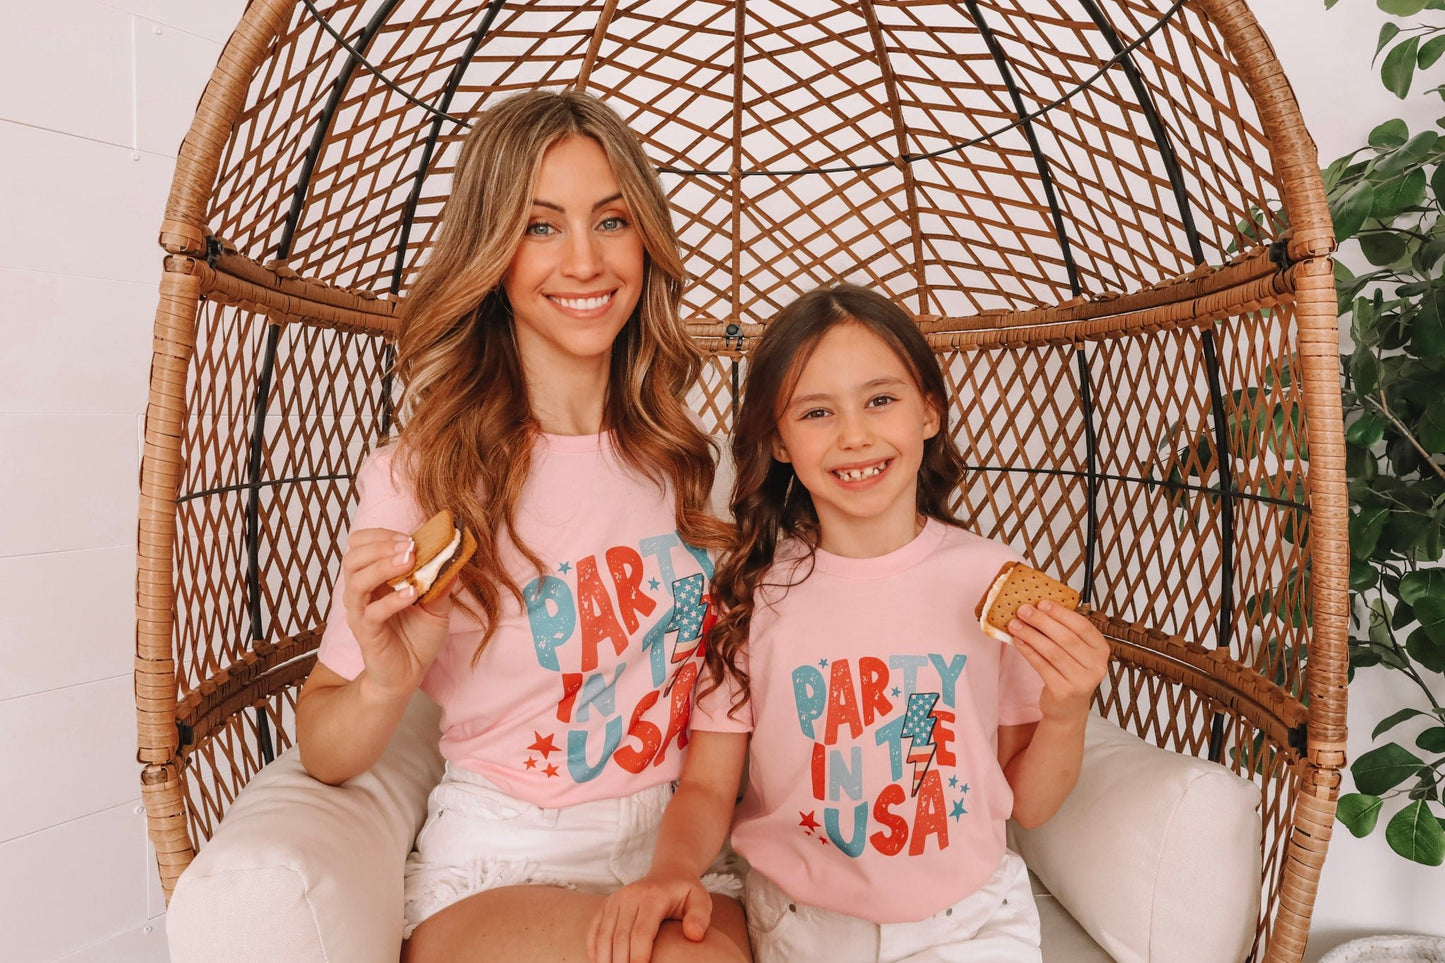 Pink Party in the USA Matching Shirts - LITTLE MIA BELLA